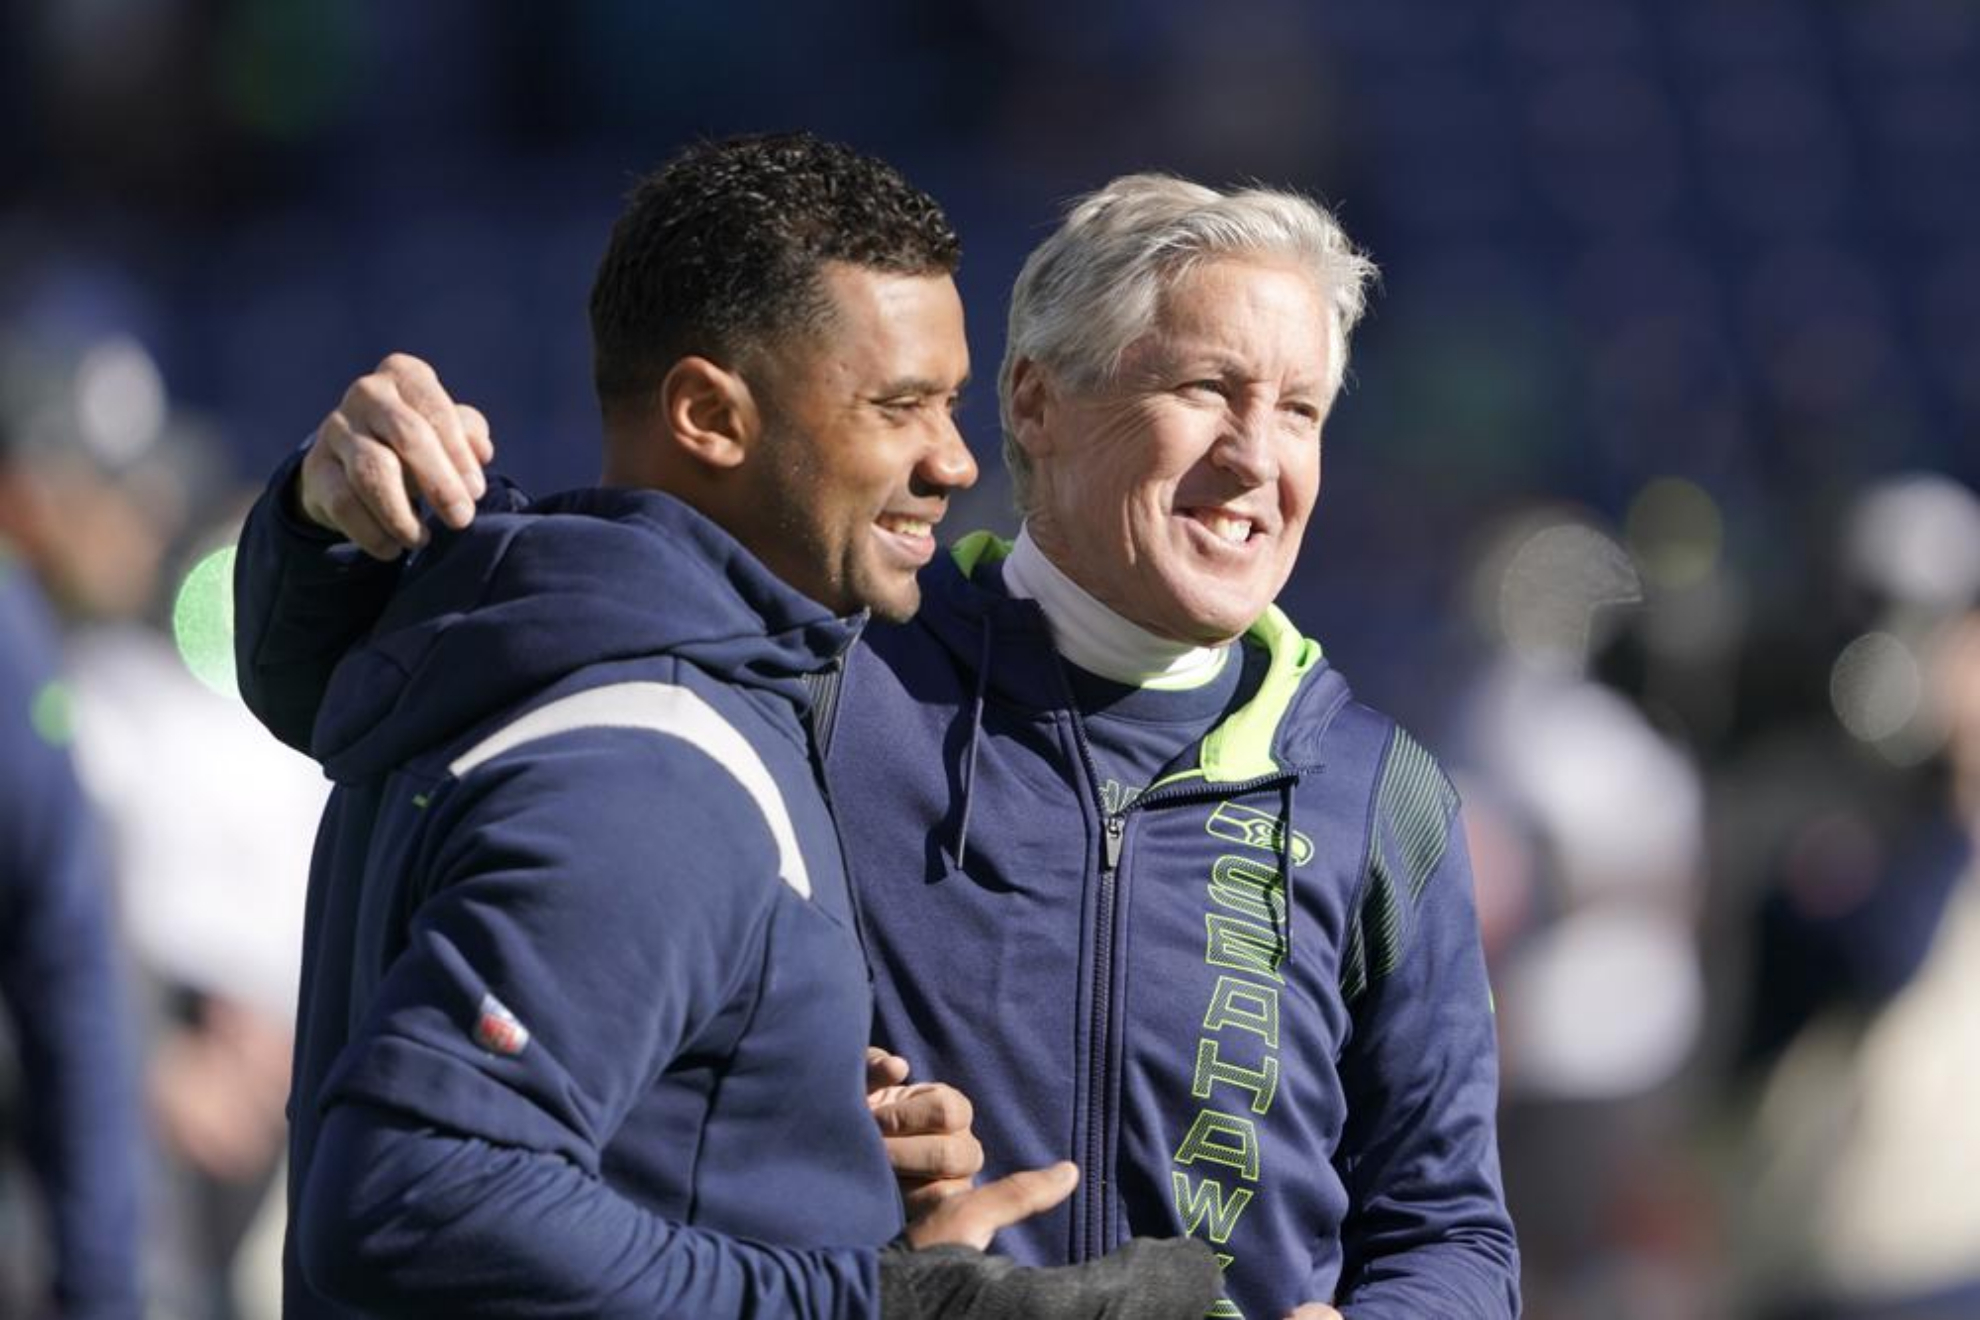 Russell Wilson alongside Pete Carroll during his stint with the Seattle Seahawks.